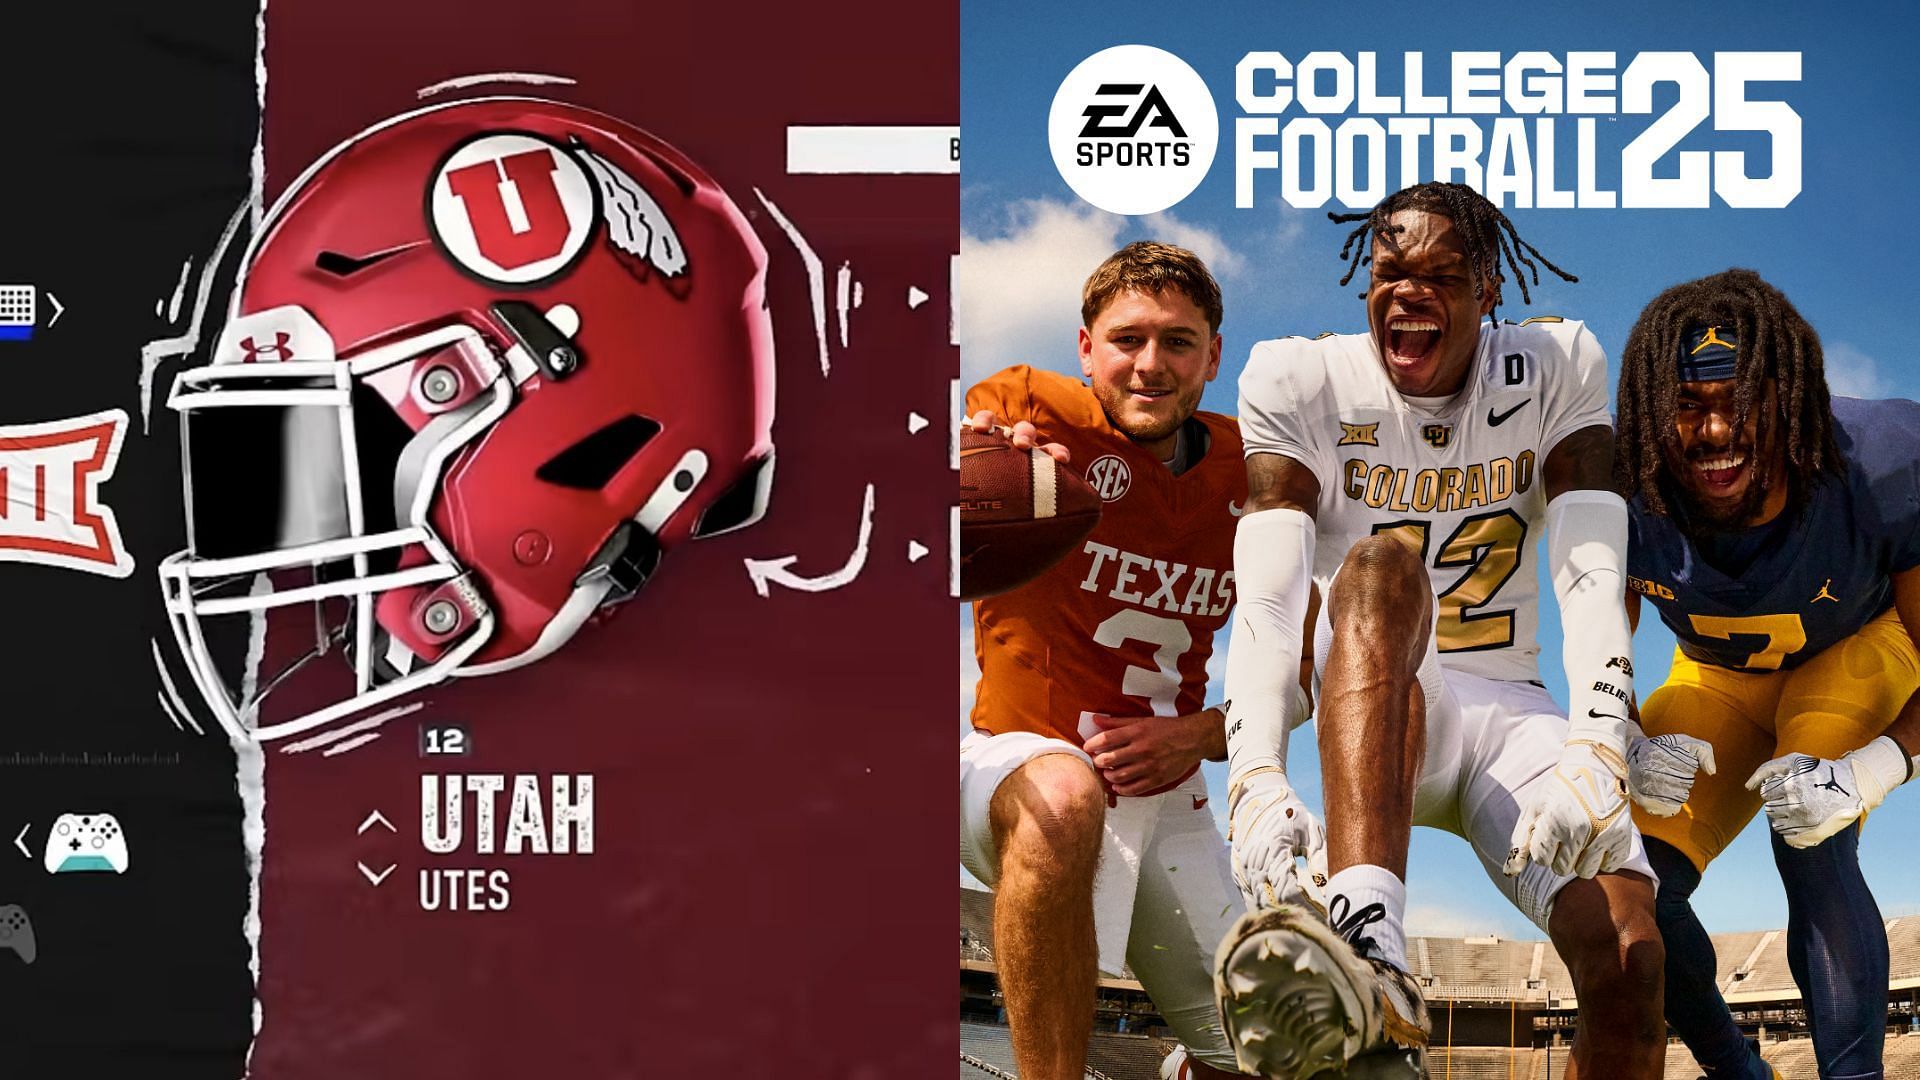 Images courtesy of EA Sports Twitter and Utah Football Twitter